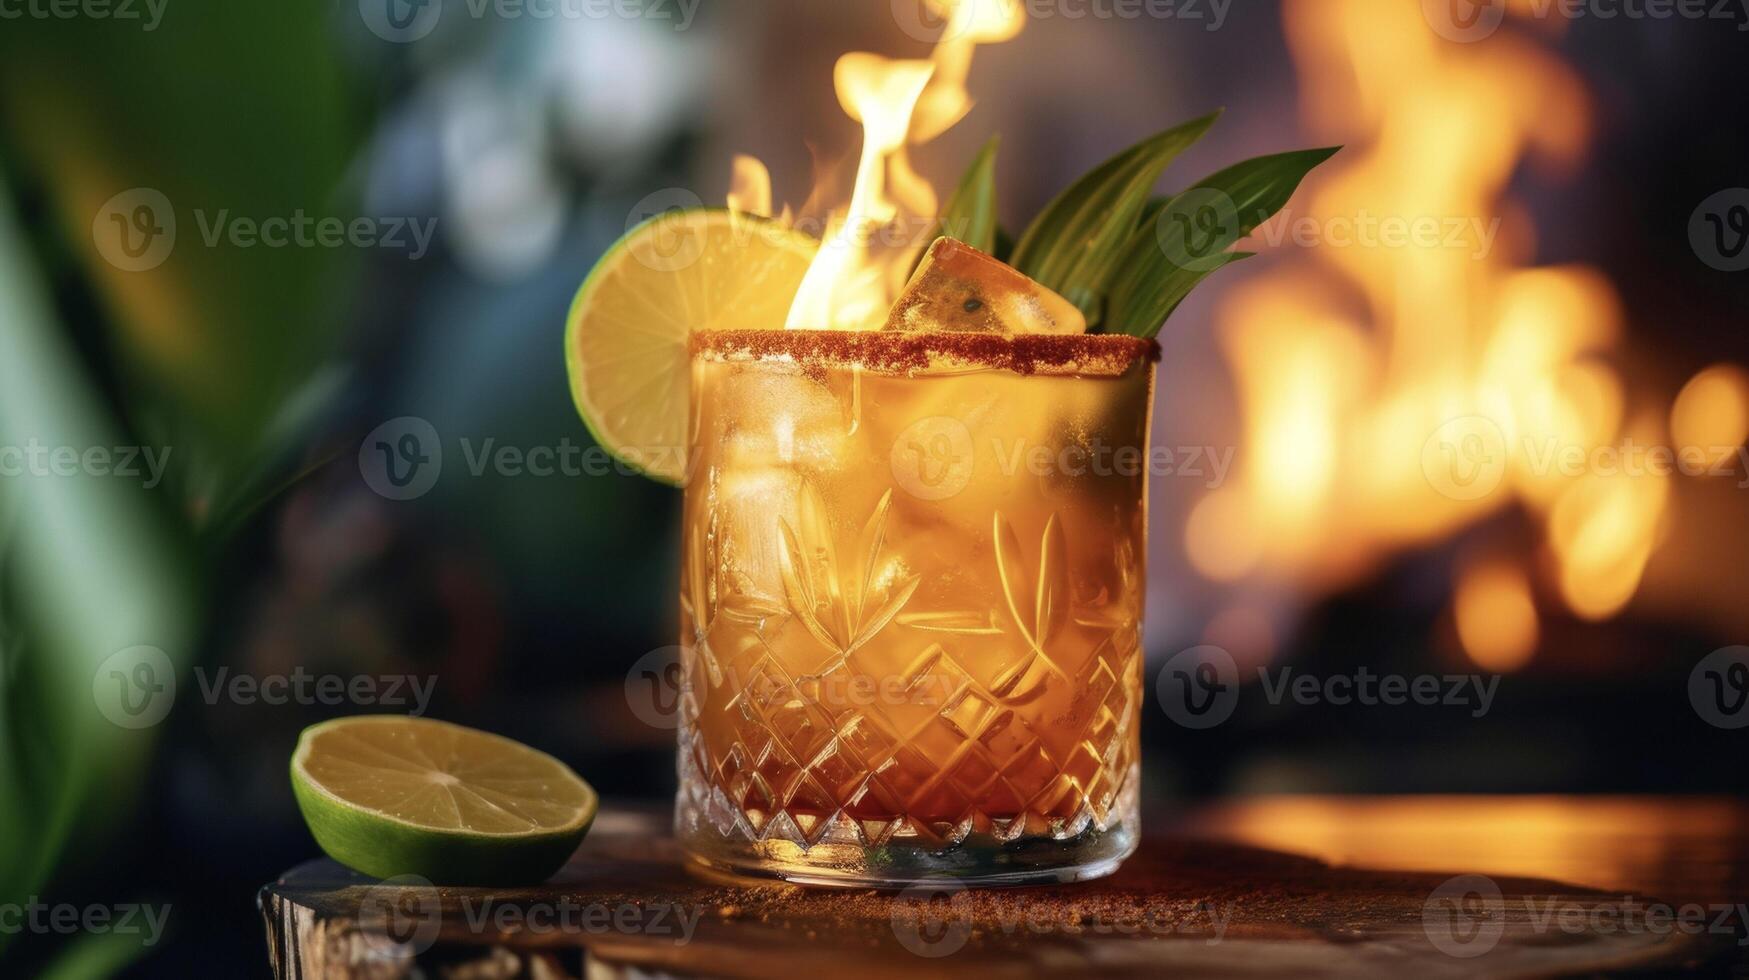 Ignite your taste buds with the Blazing Mai Tai a bold and intense tail that combines the sweetness of a clic Mai Tai with the fiery kick of overproof rum photo